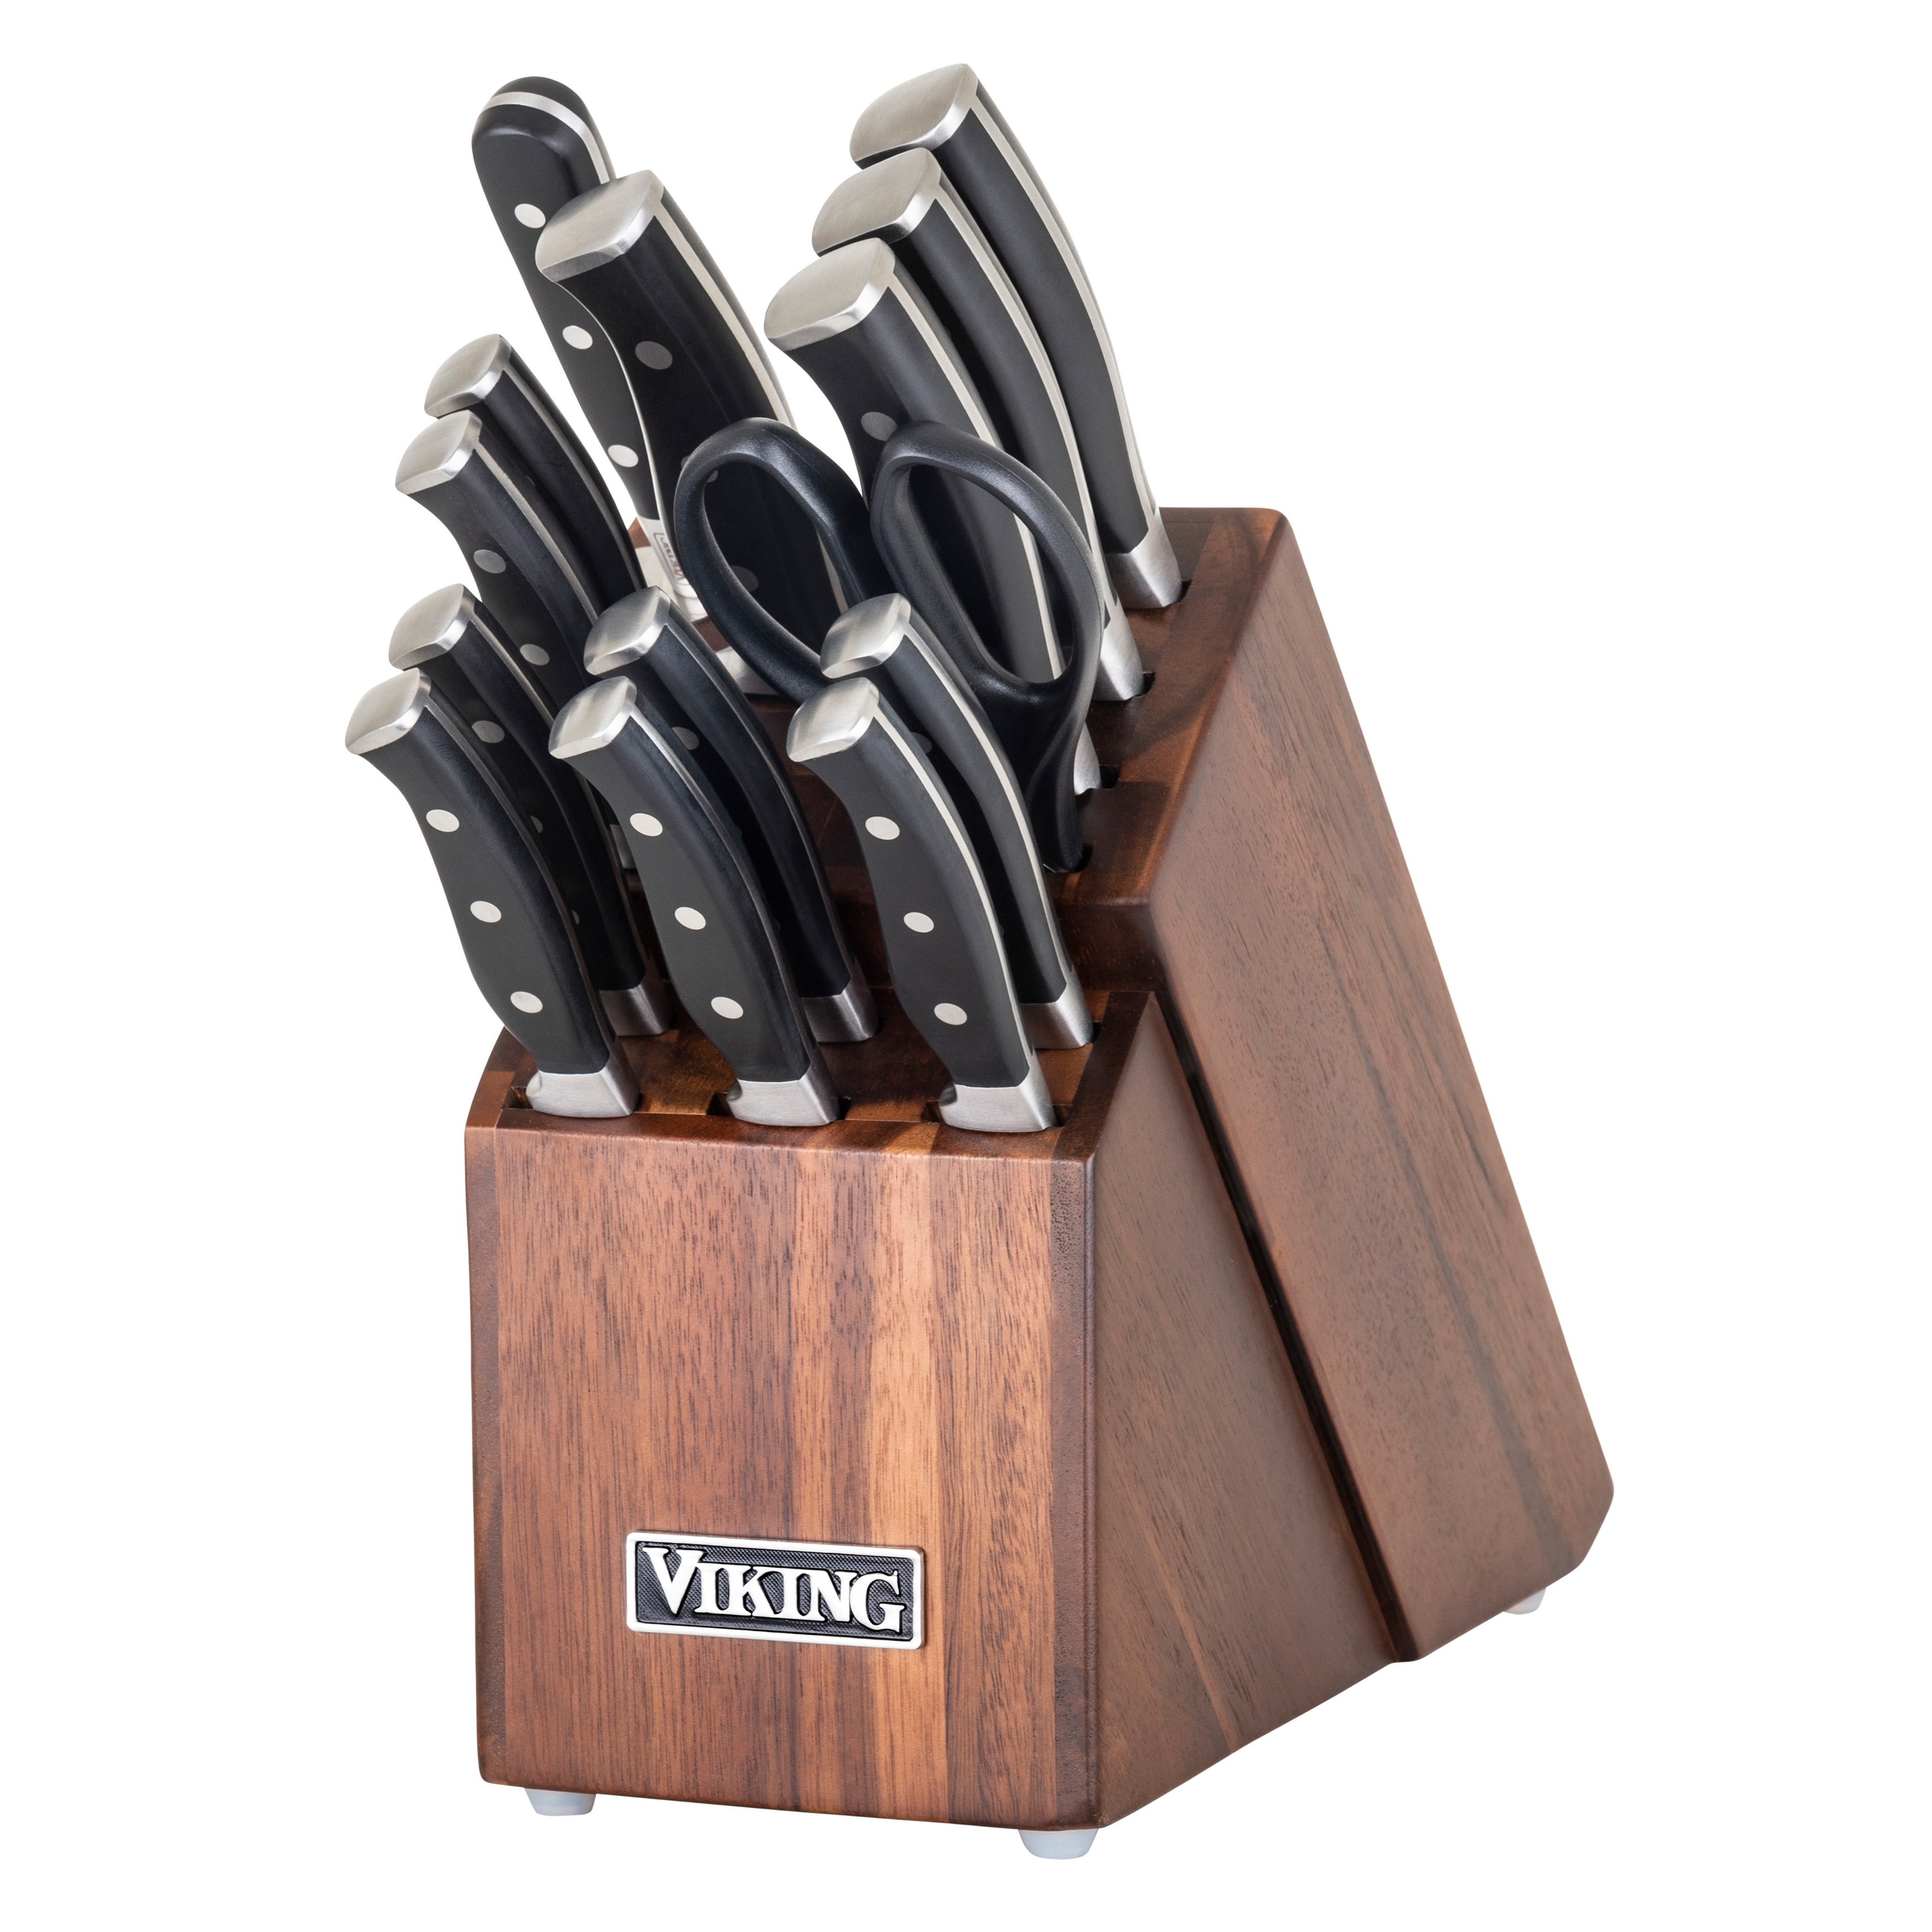 https://ak1.ostkcdn.com/images/products/is/images/direct/912cddf2c86bf383d685d988aef12bfc4023f9c5/Viking-Professional-15-Piece-German-Steel-Cutlery-Set-with-Acacia-Wood-Block.jpg